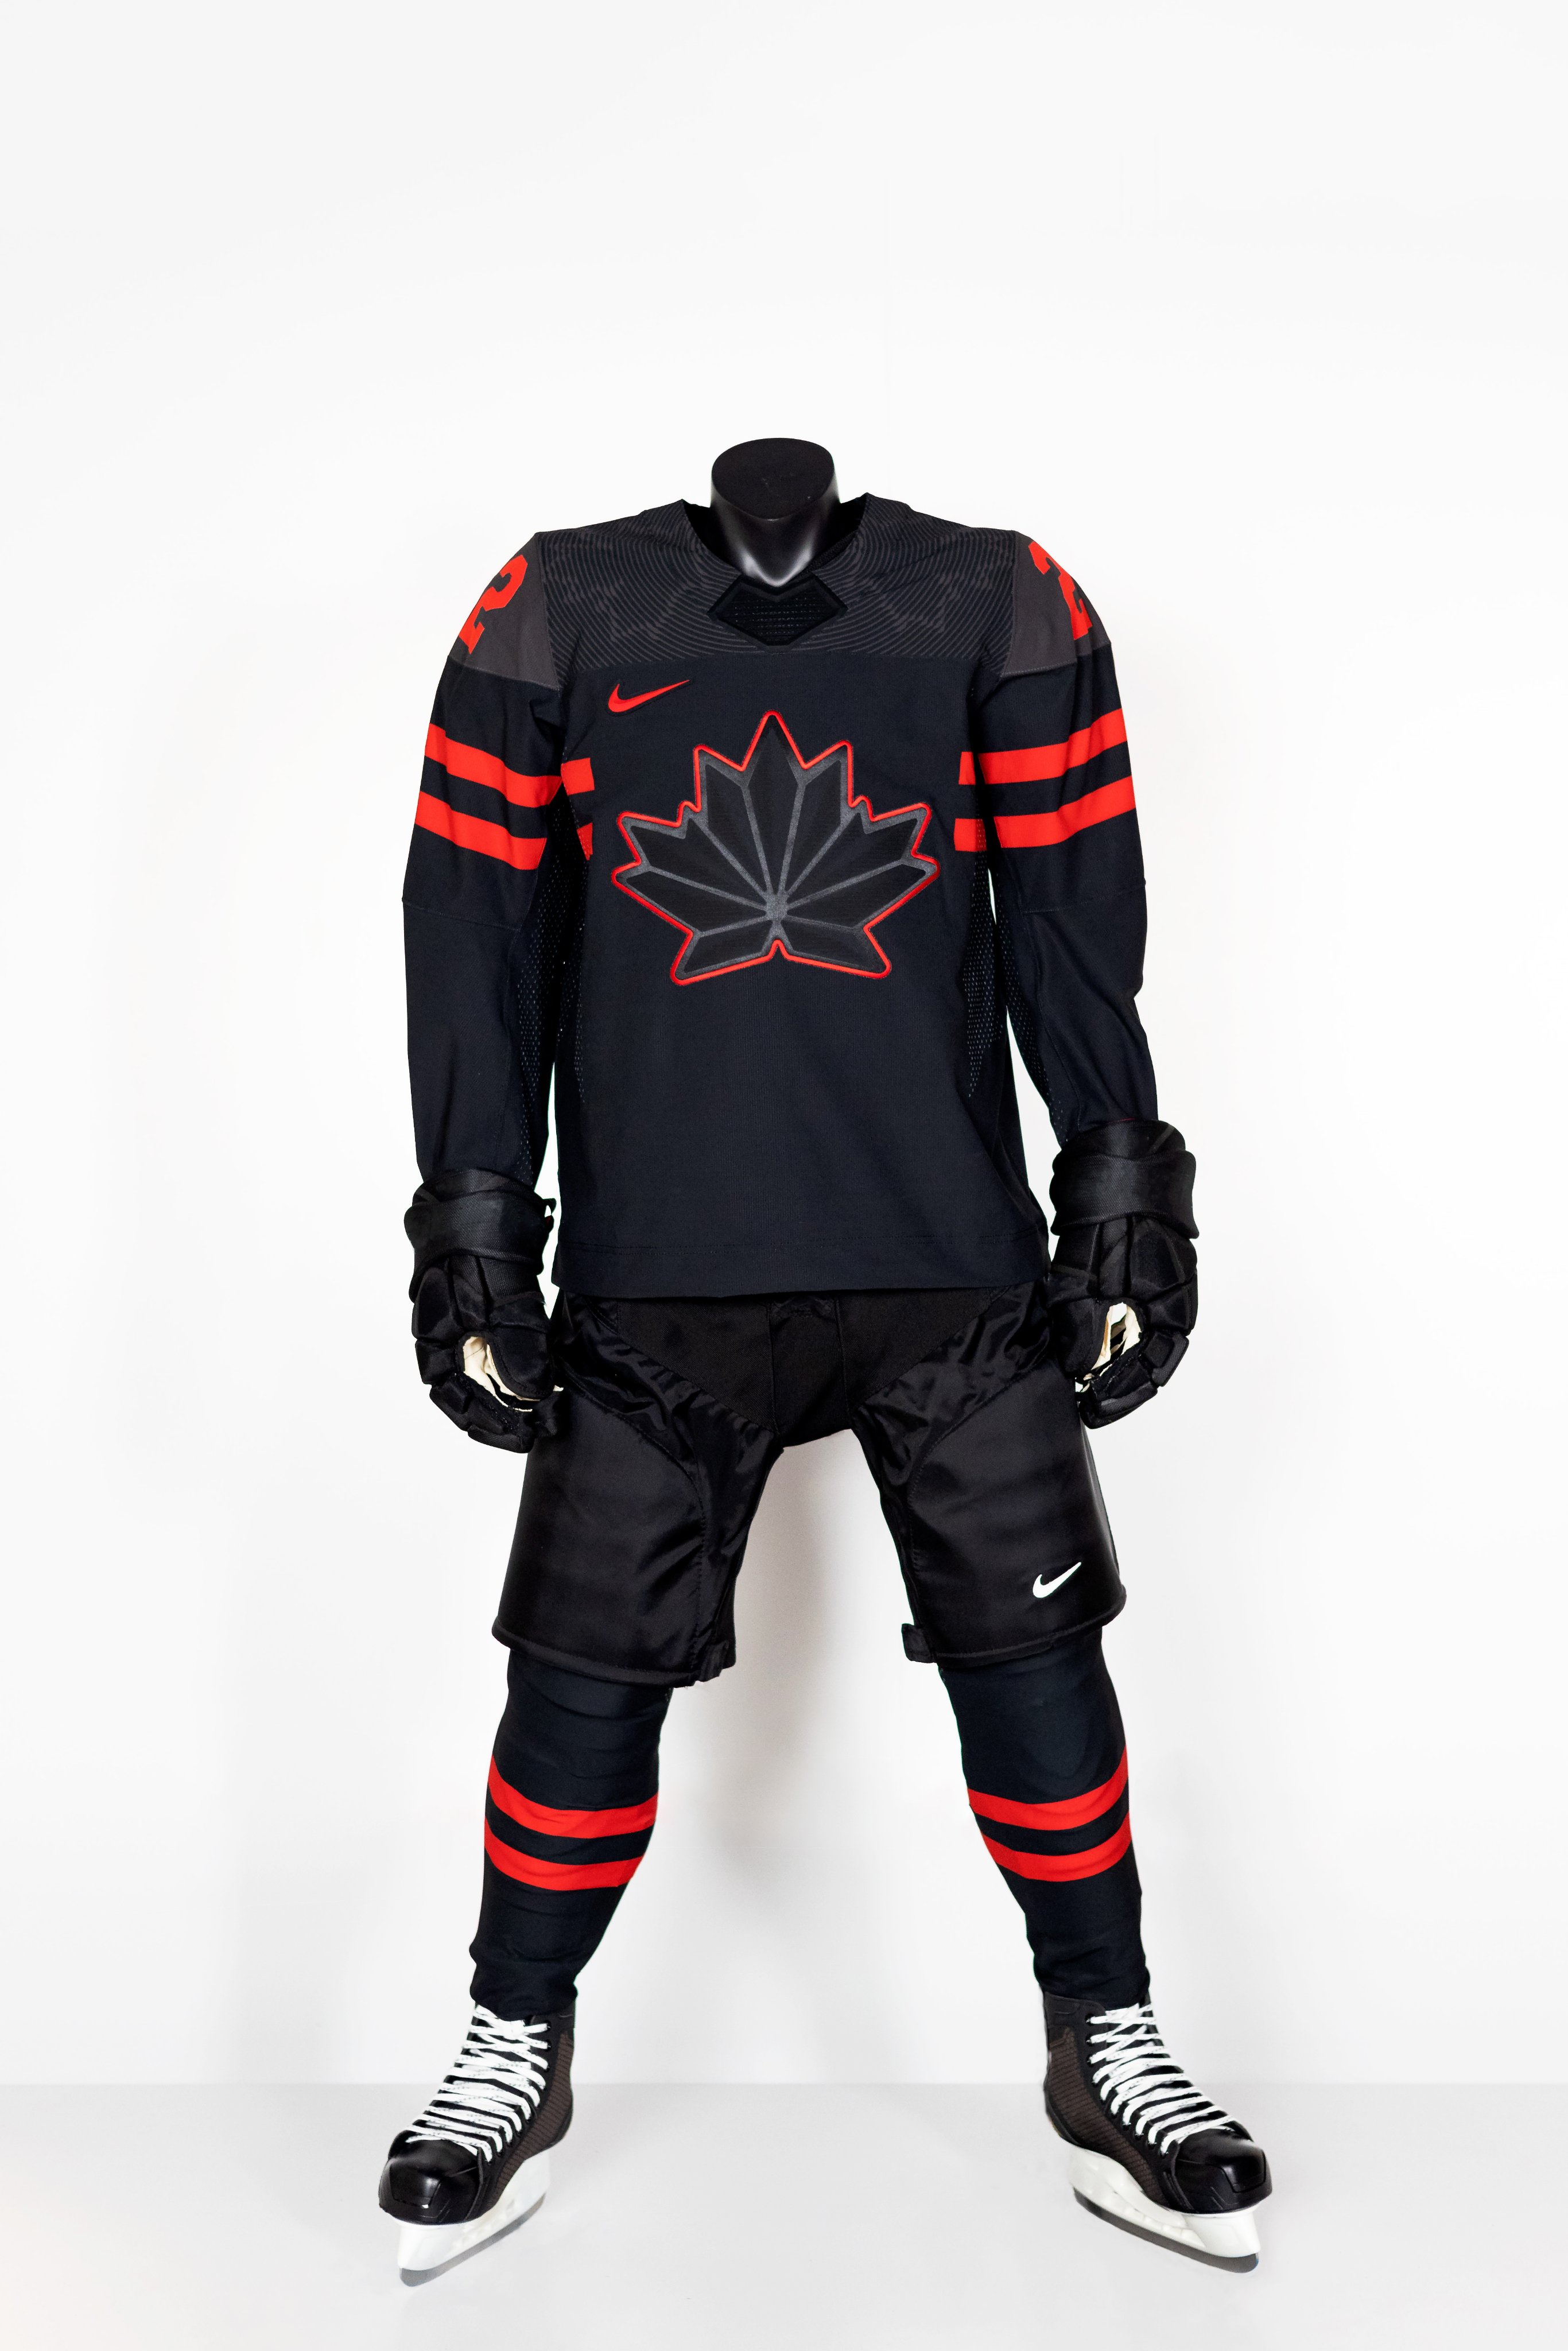 TSN on X: Presenting the official 2022 Team Canada Olympic